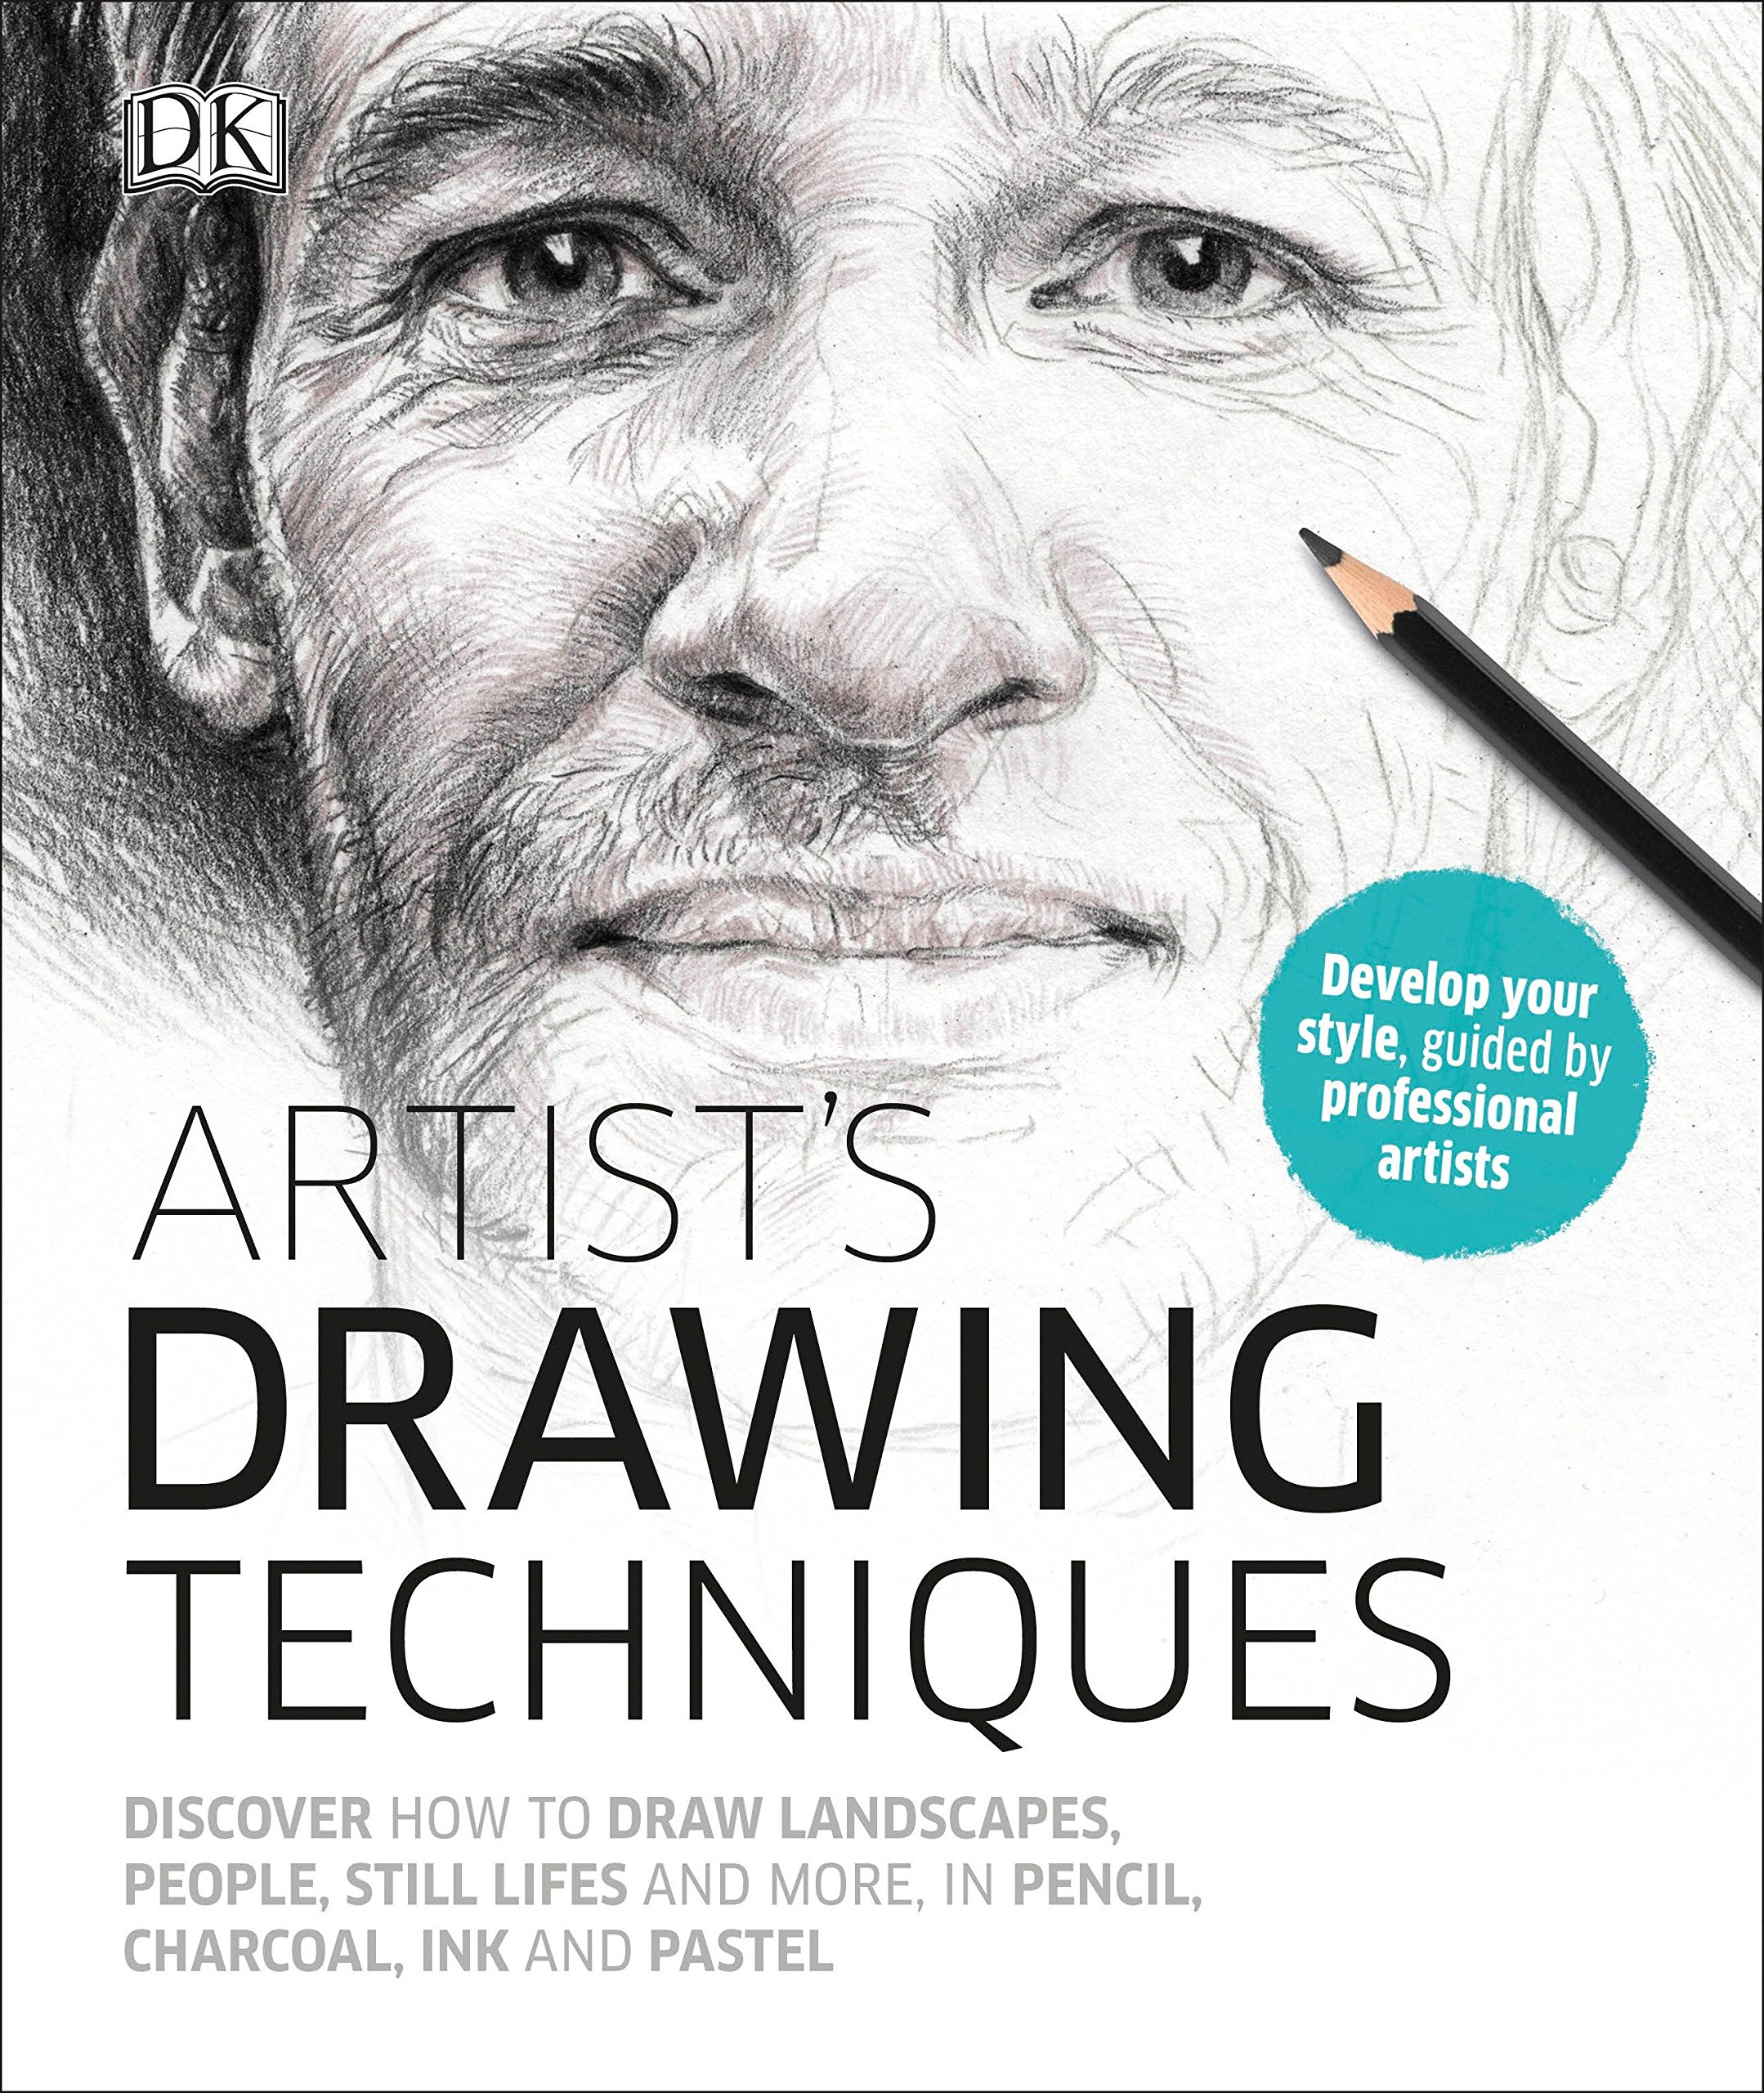 Great drawing books for artists and beginners alike that you mustn't miss